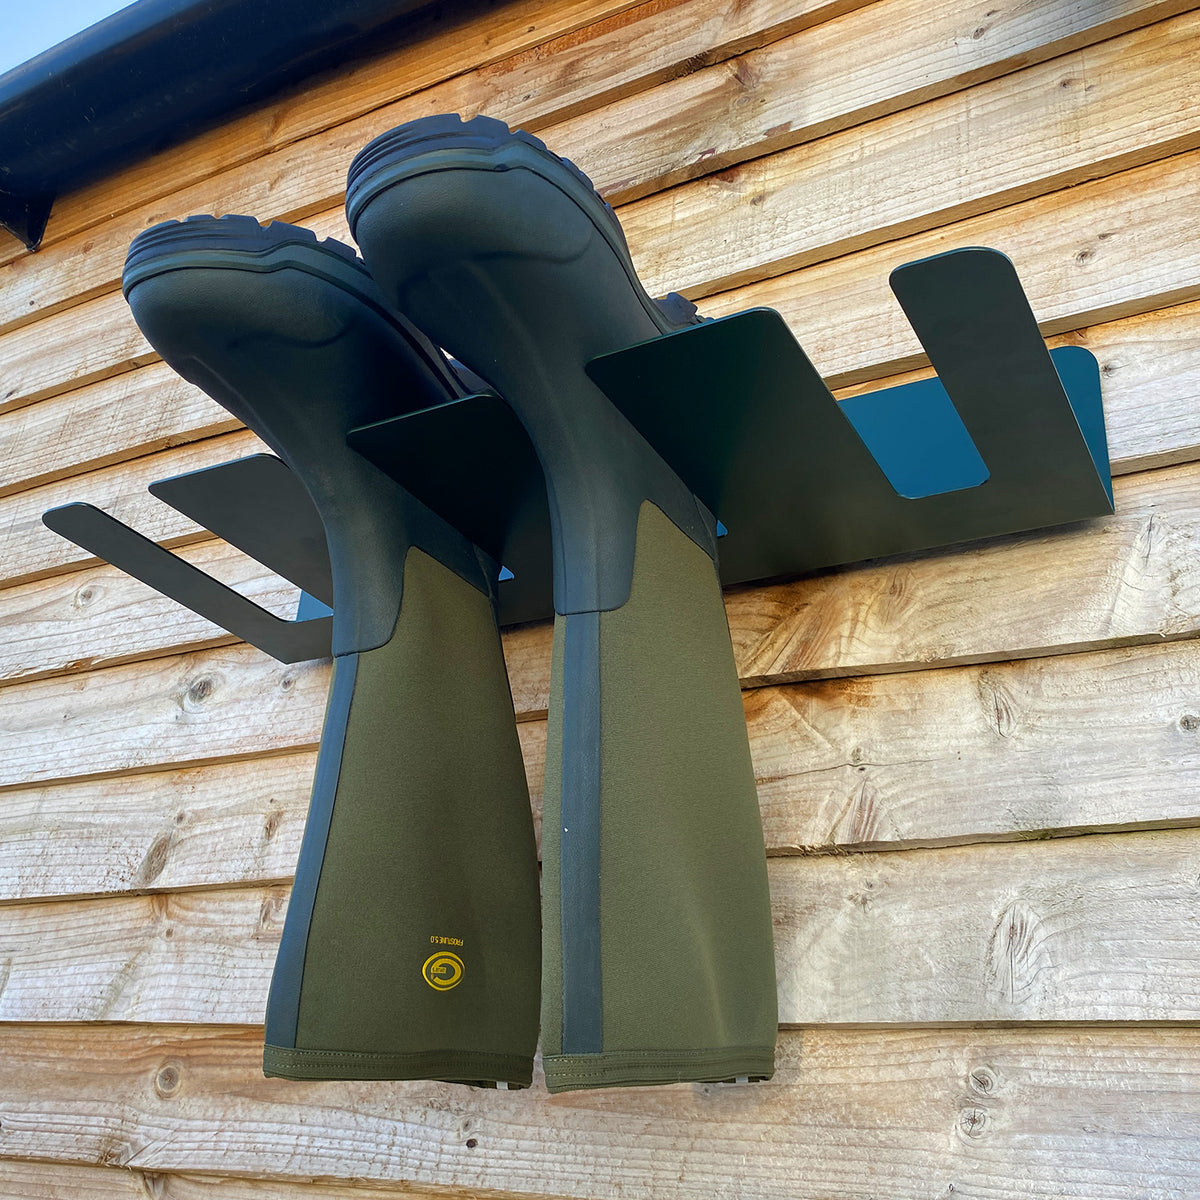 Wellymate Wall Mount Welly Rack - Store Wellington Boots